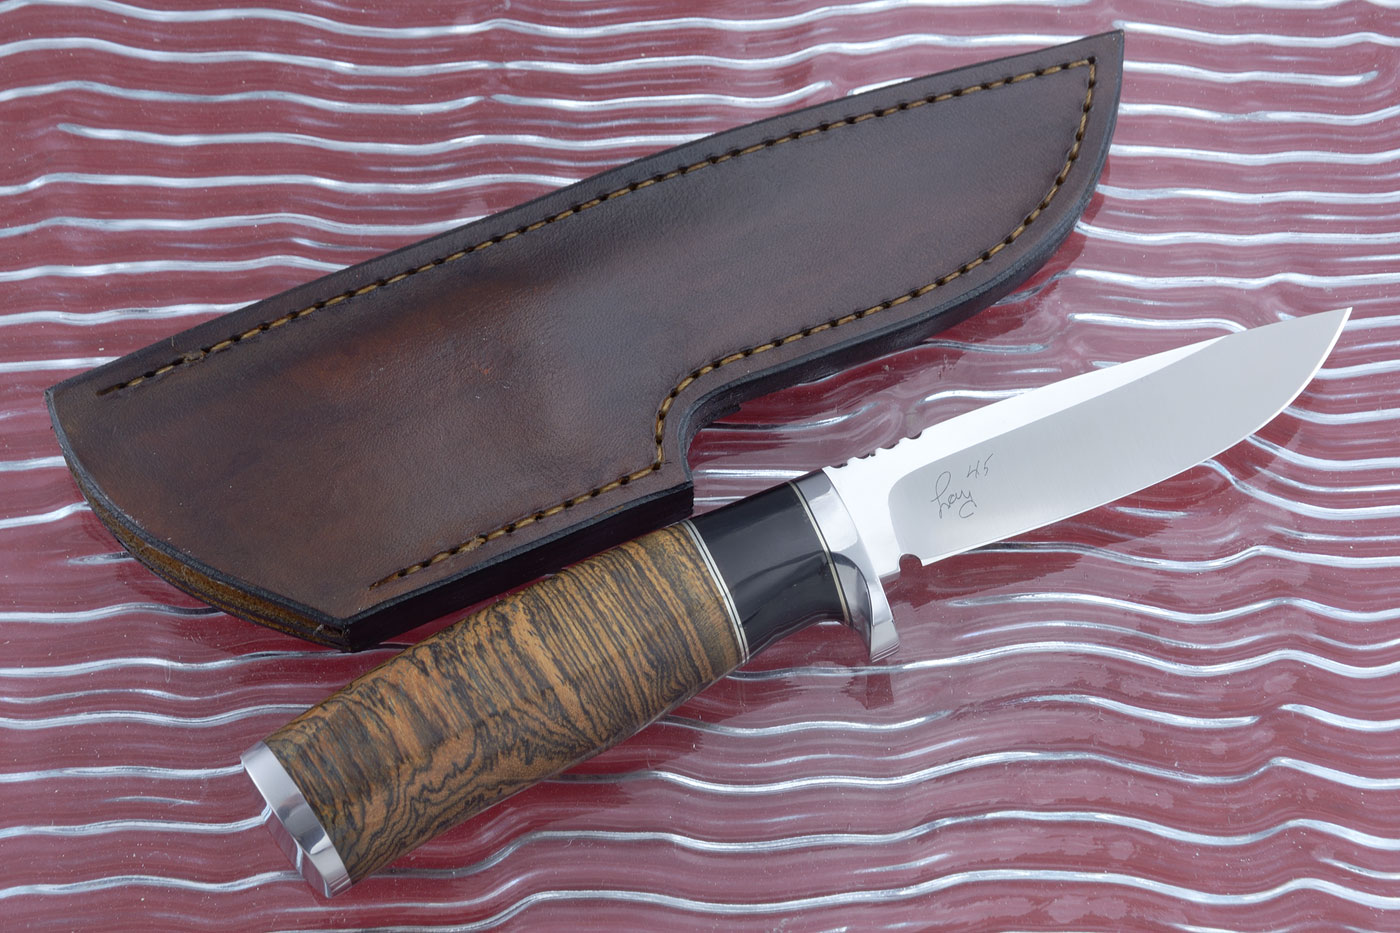 Personal with Bocote and Buffalo Horn (45th Anniversary Knife)